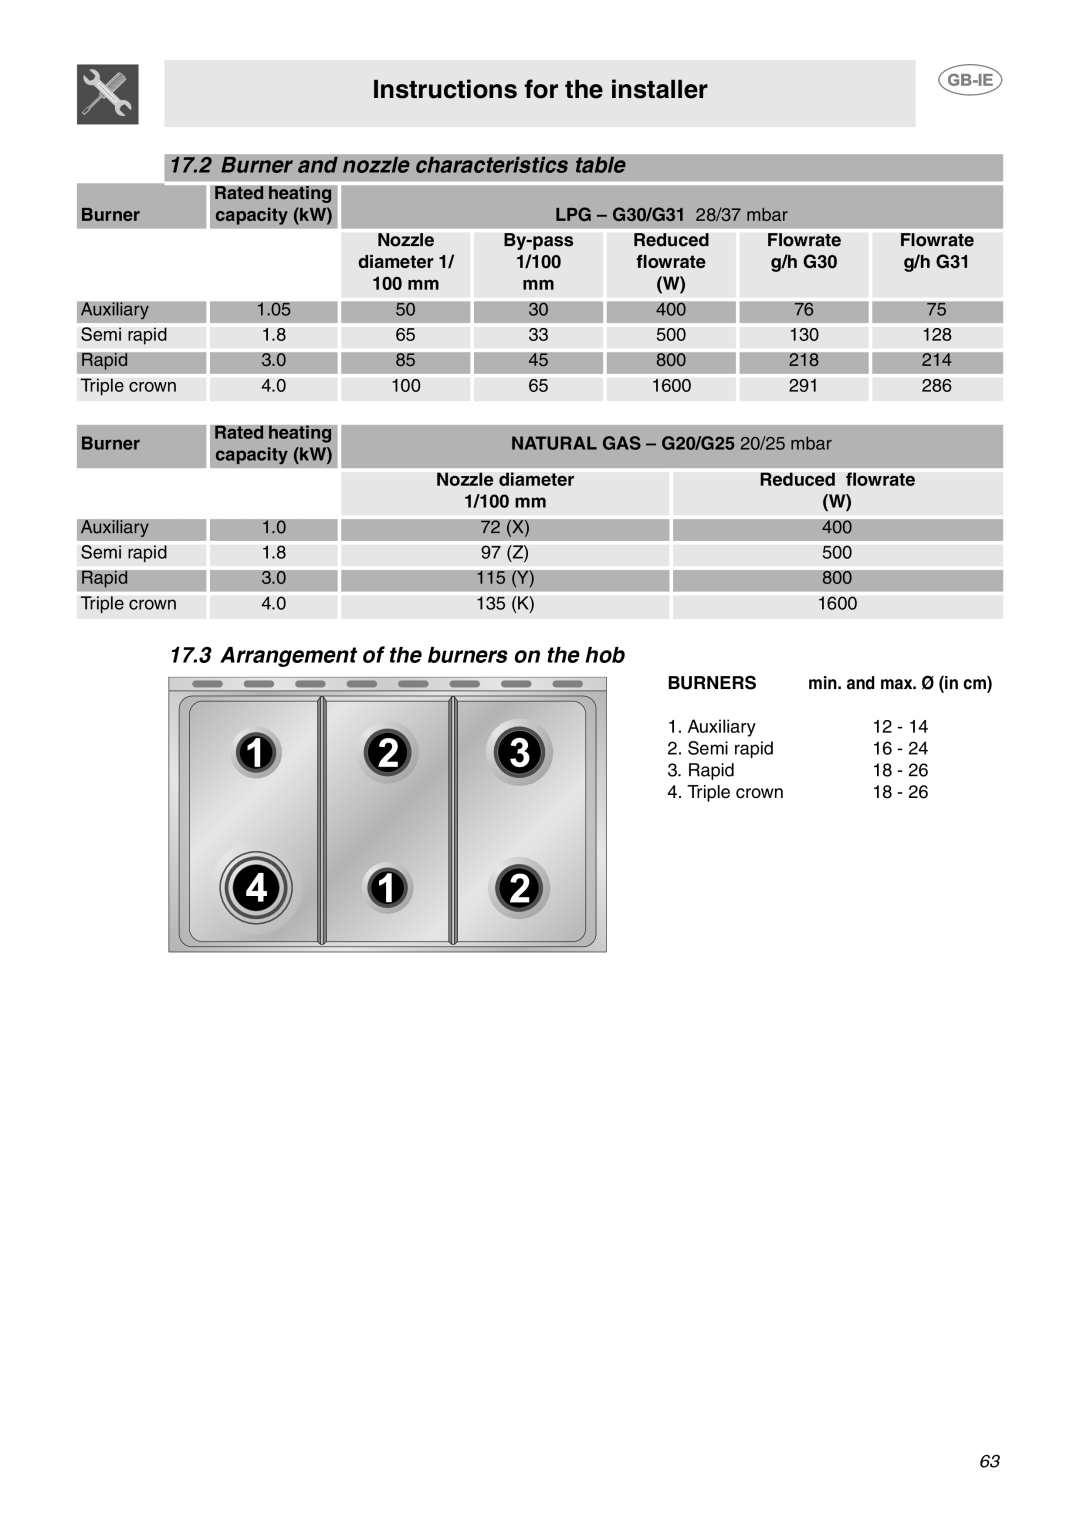 Smeg CE92GPX Burner and nozzle characteristics table, Arrangement of the burners on the hob, Rated heating, capacity kW 